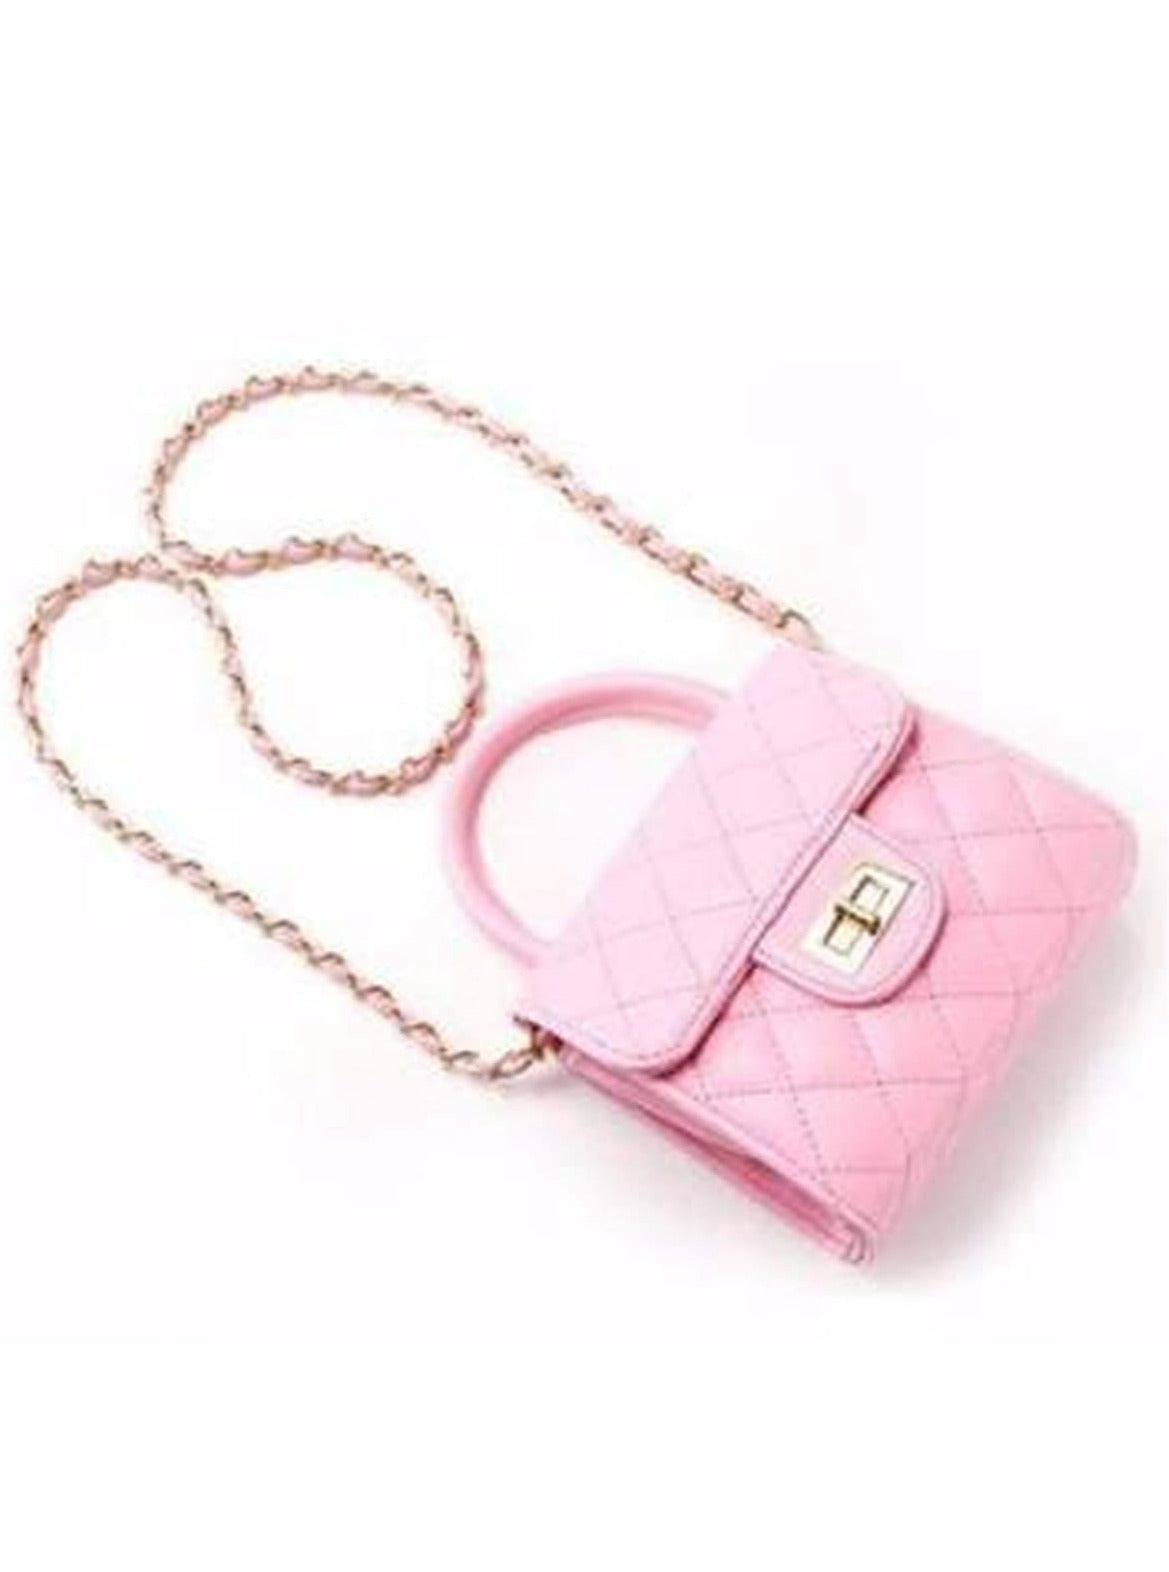 Kids Quilted Flap Shoulder Bag | Fashion Chain Purse - Mia Belle Girls Beige / One Size